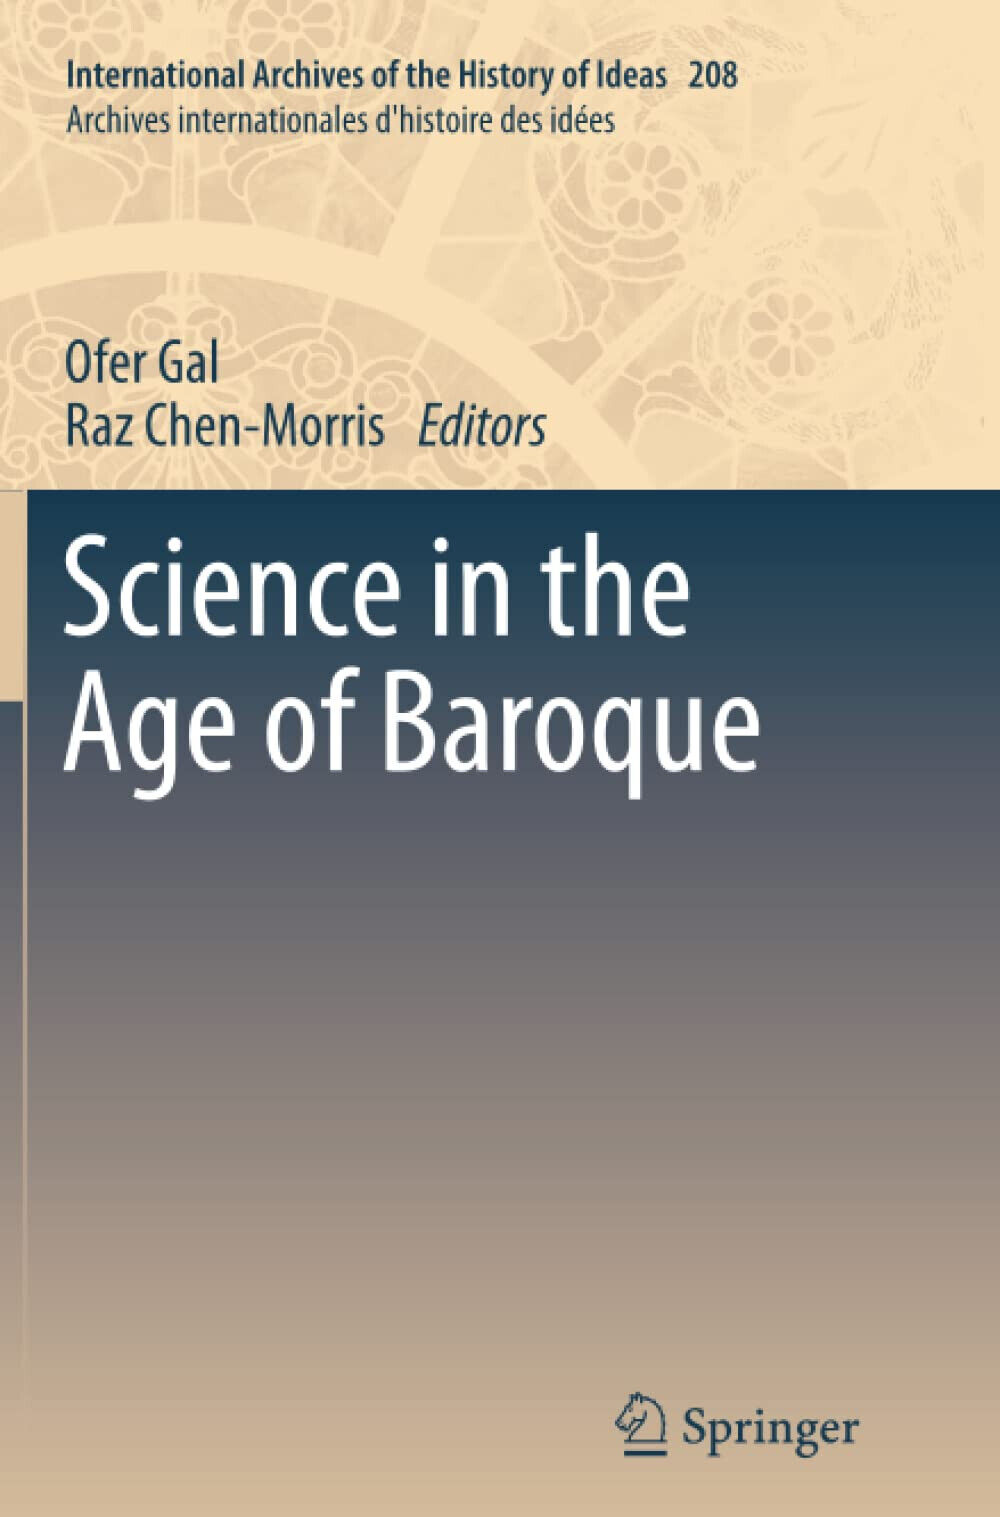 Science in the Age of Baroque - Ofer Gal - Springer, 2014